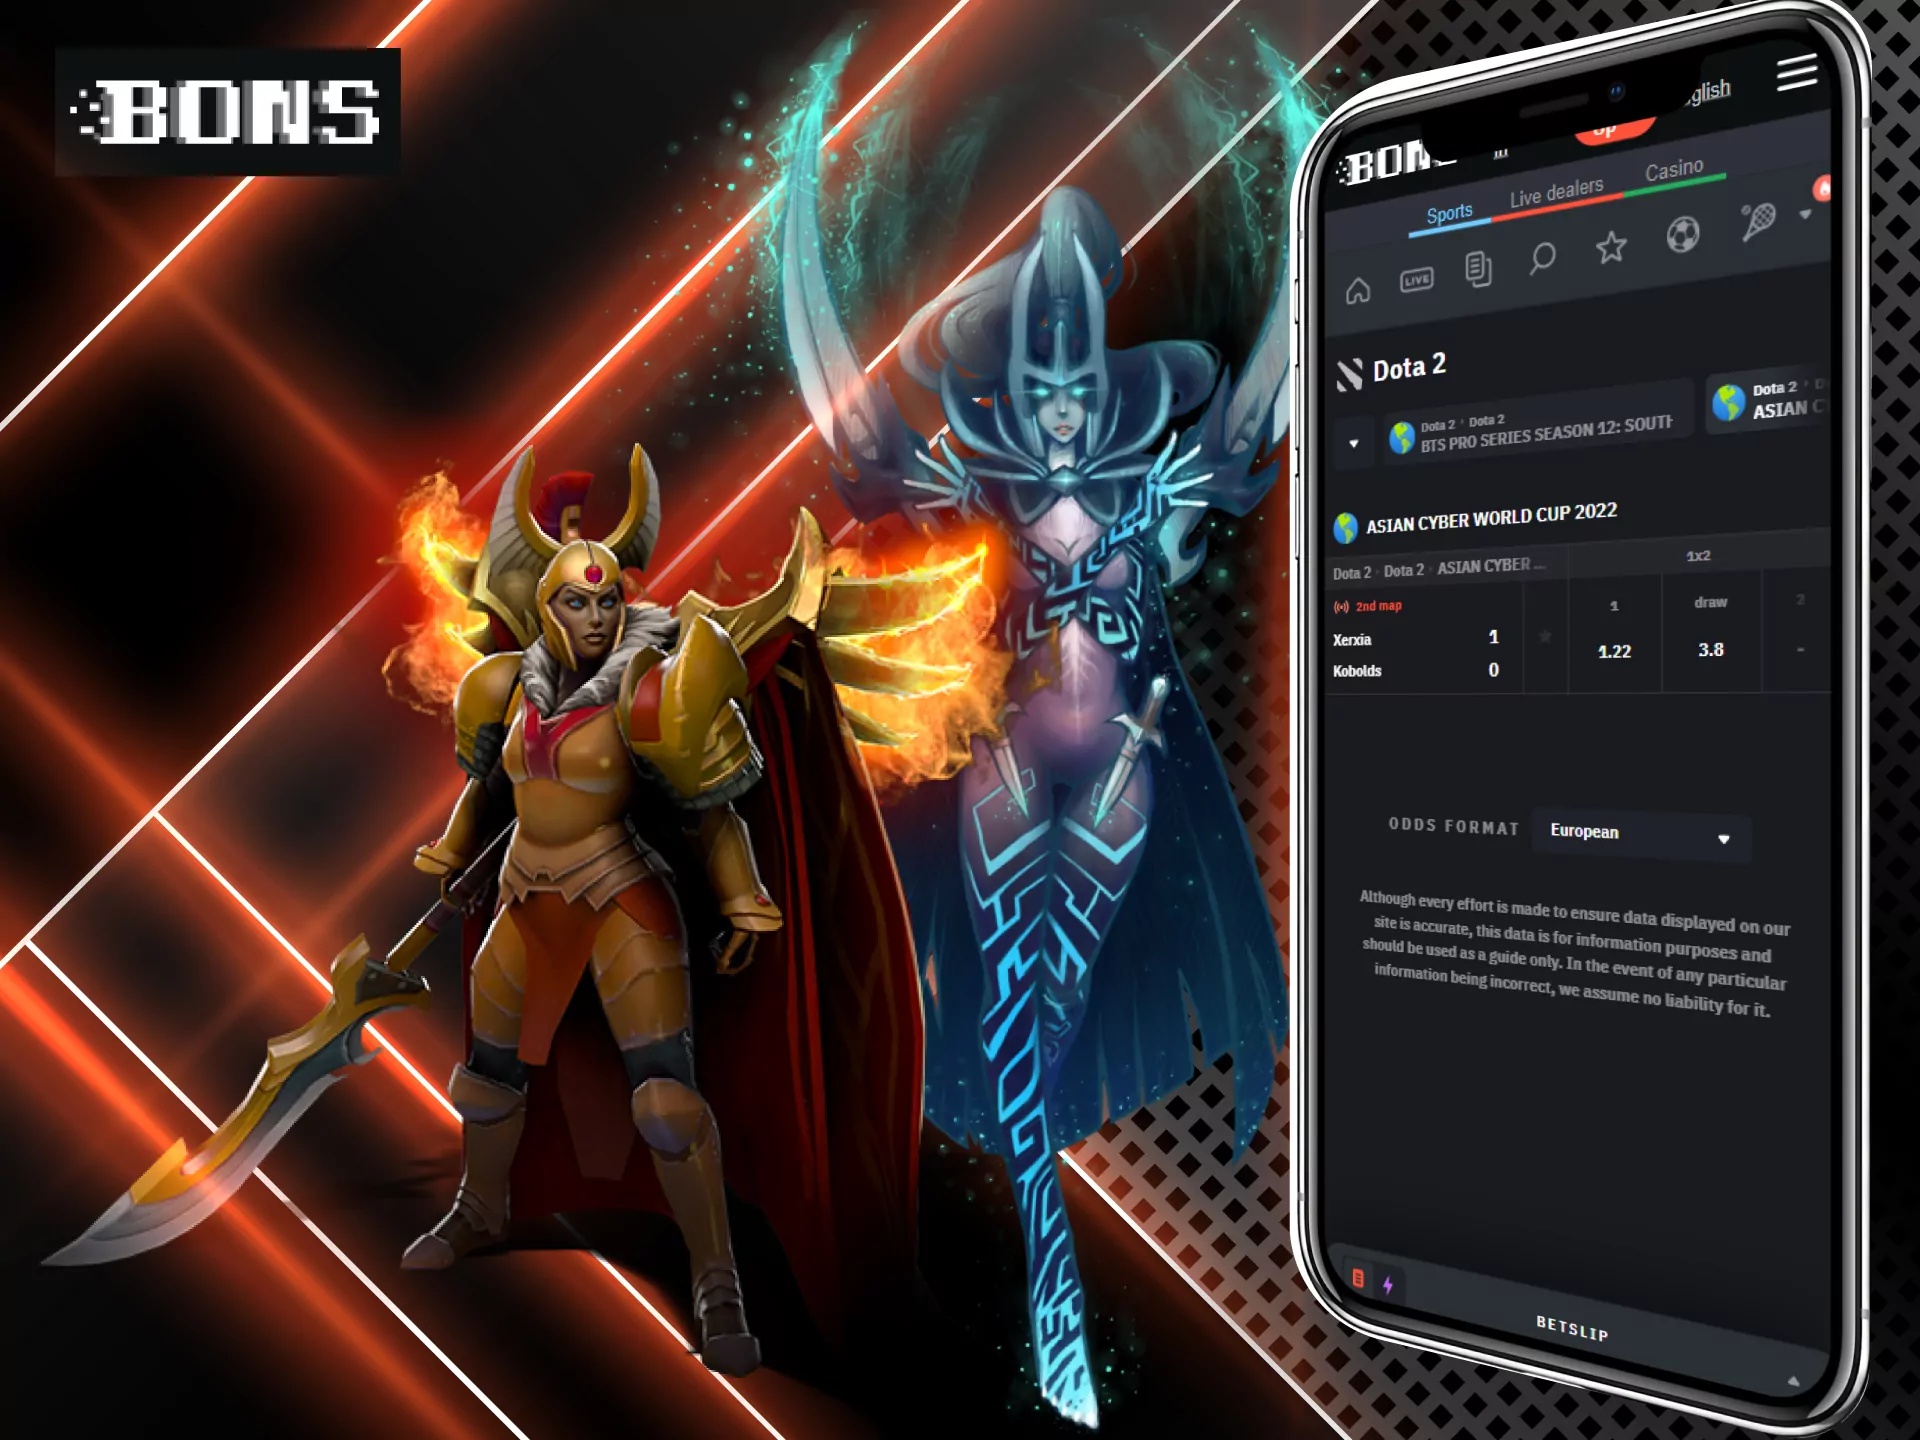 Bet on the DOTA 2 events and win money from the cybersports.